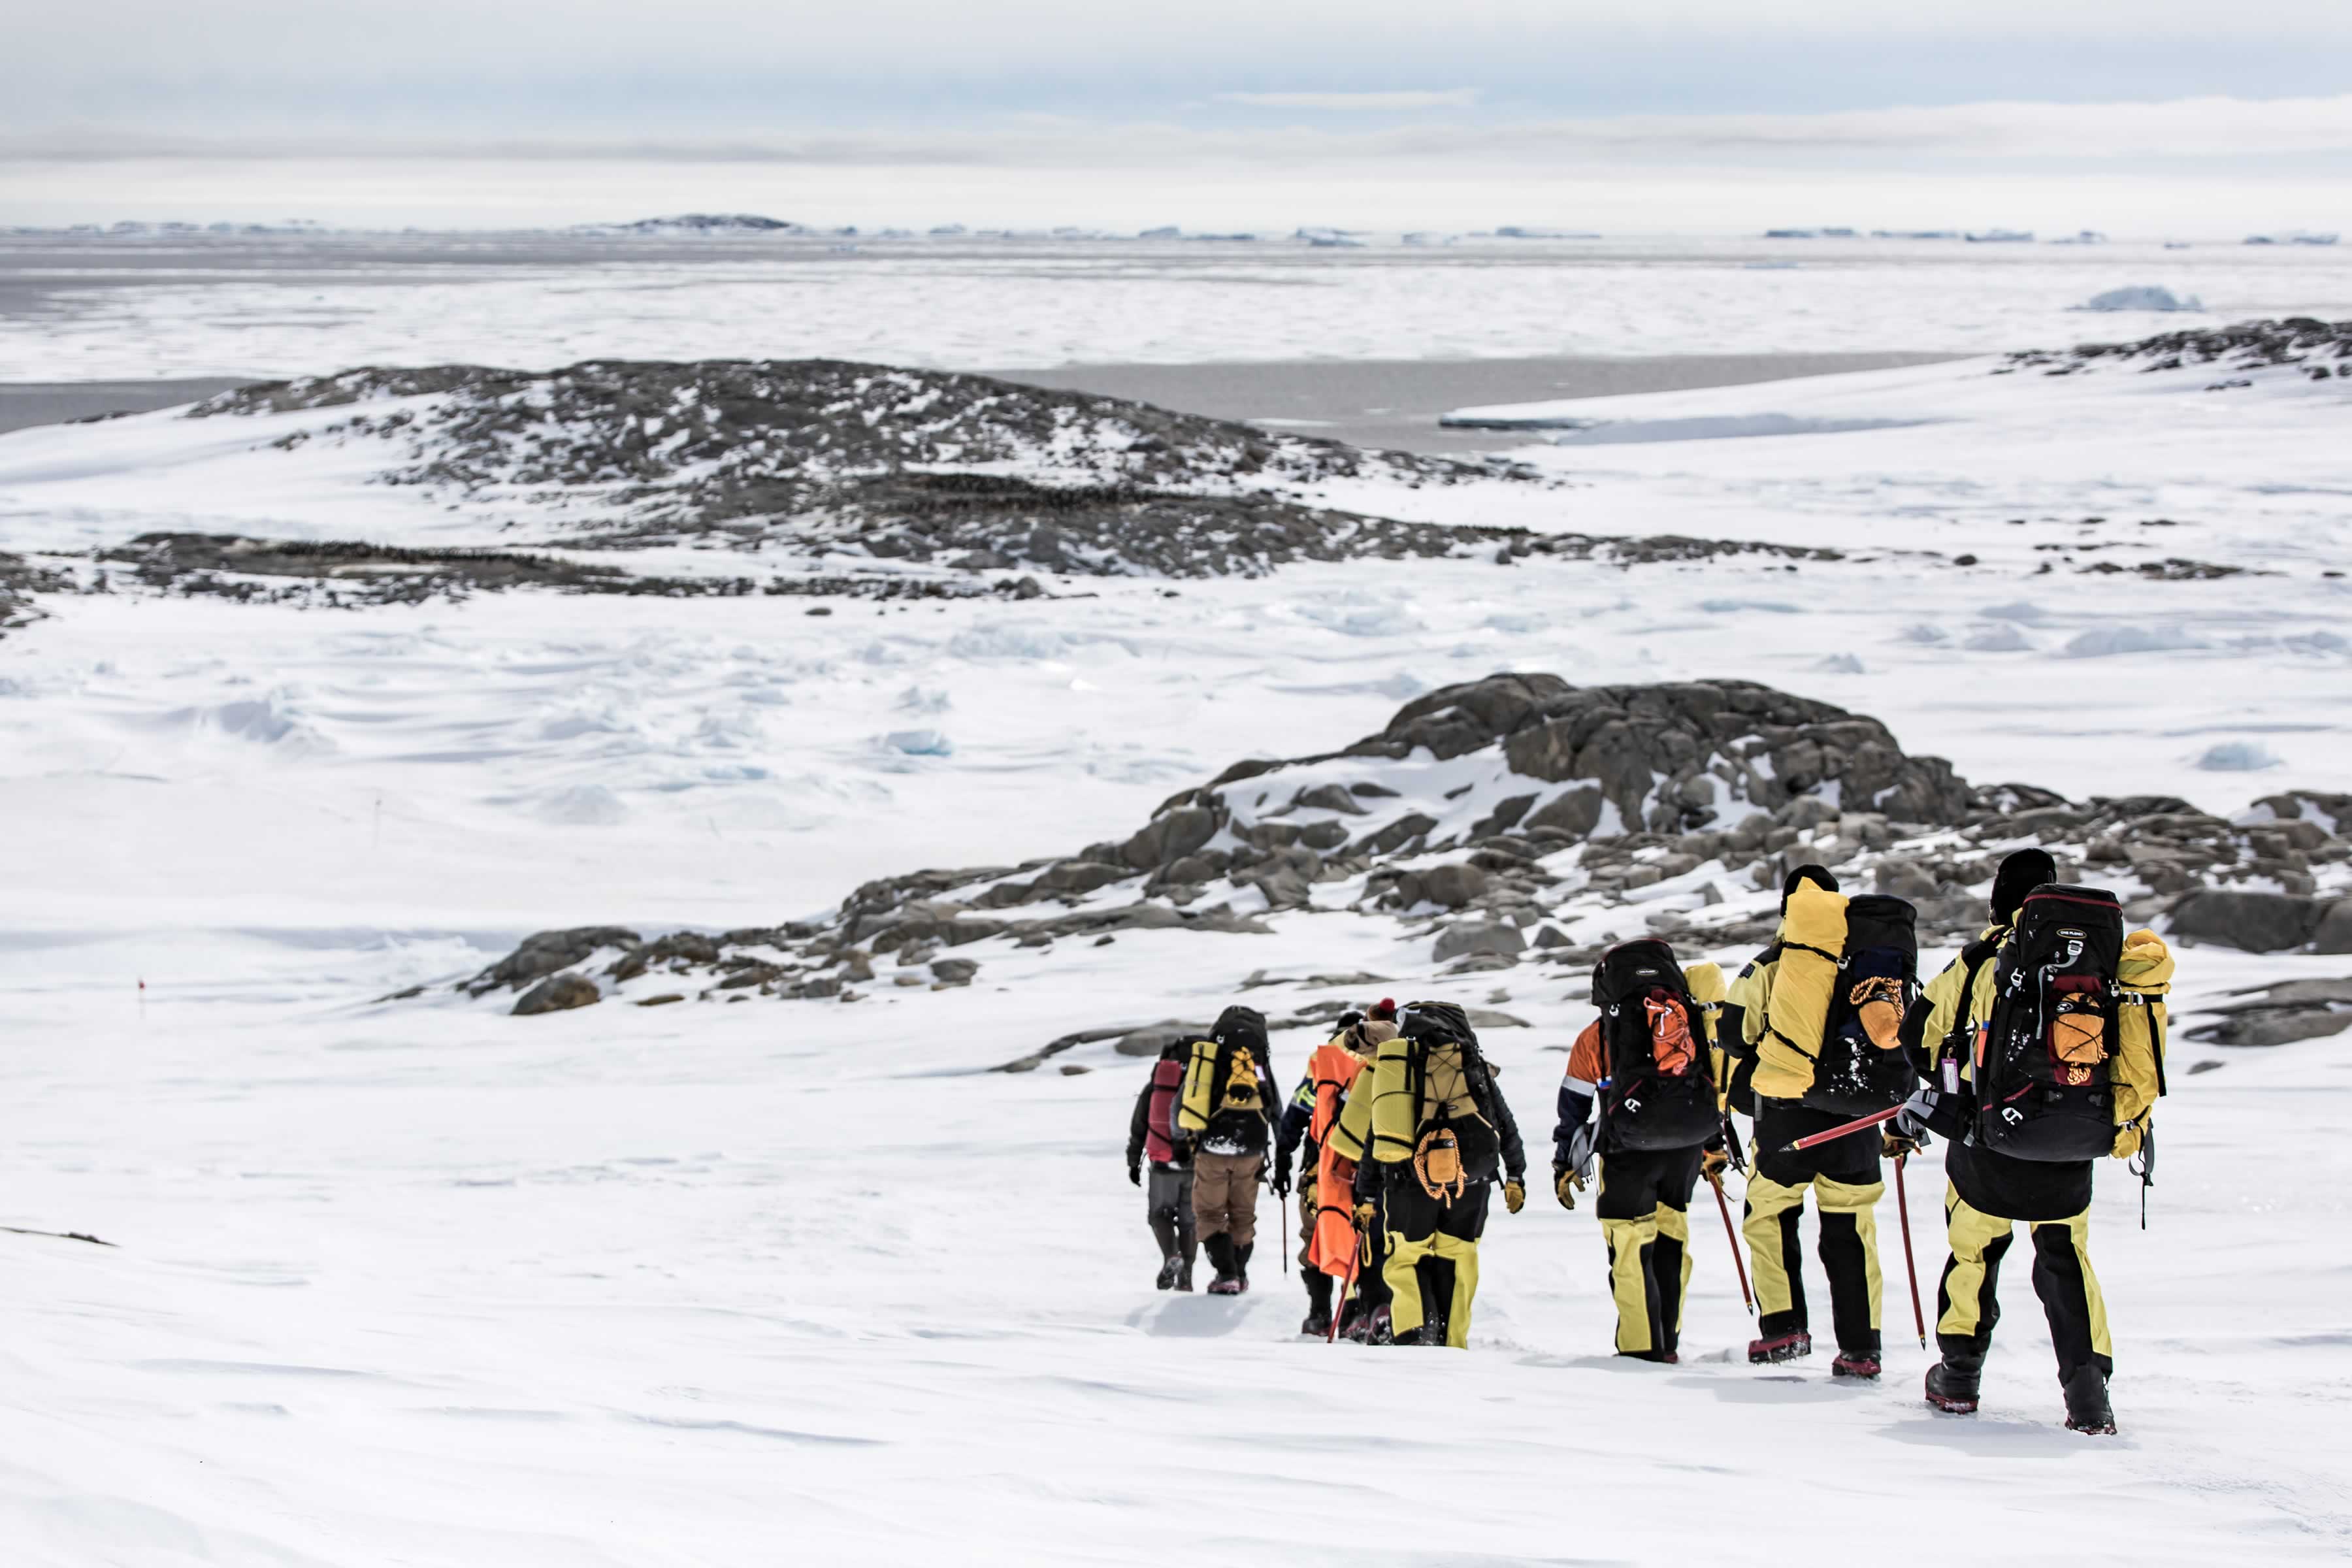 Group of expeditioners with packs on in foreground heading downhill towards sea ice covered channel with rocky island in background. Photo: Dominic Hall.